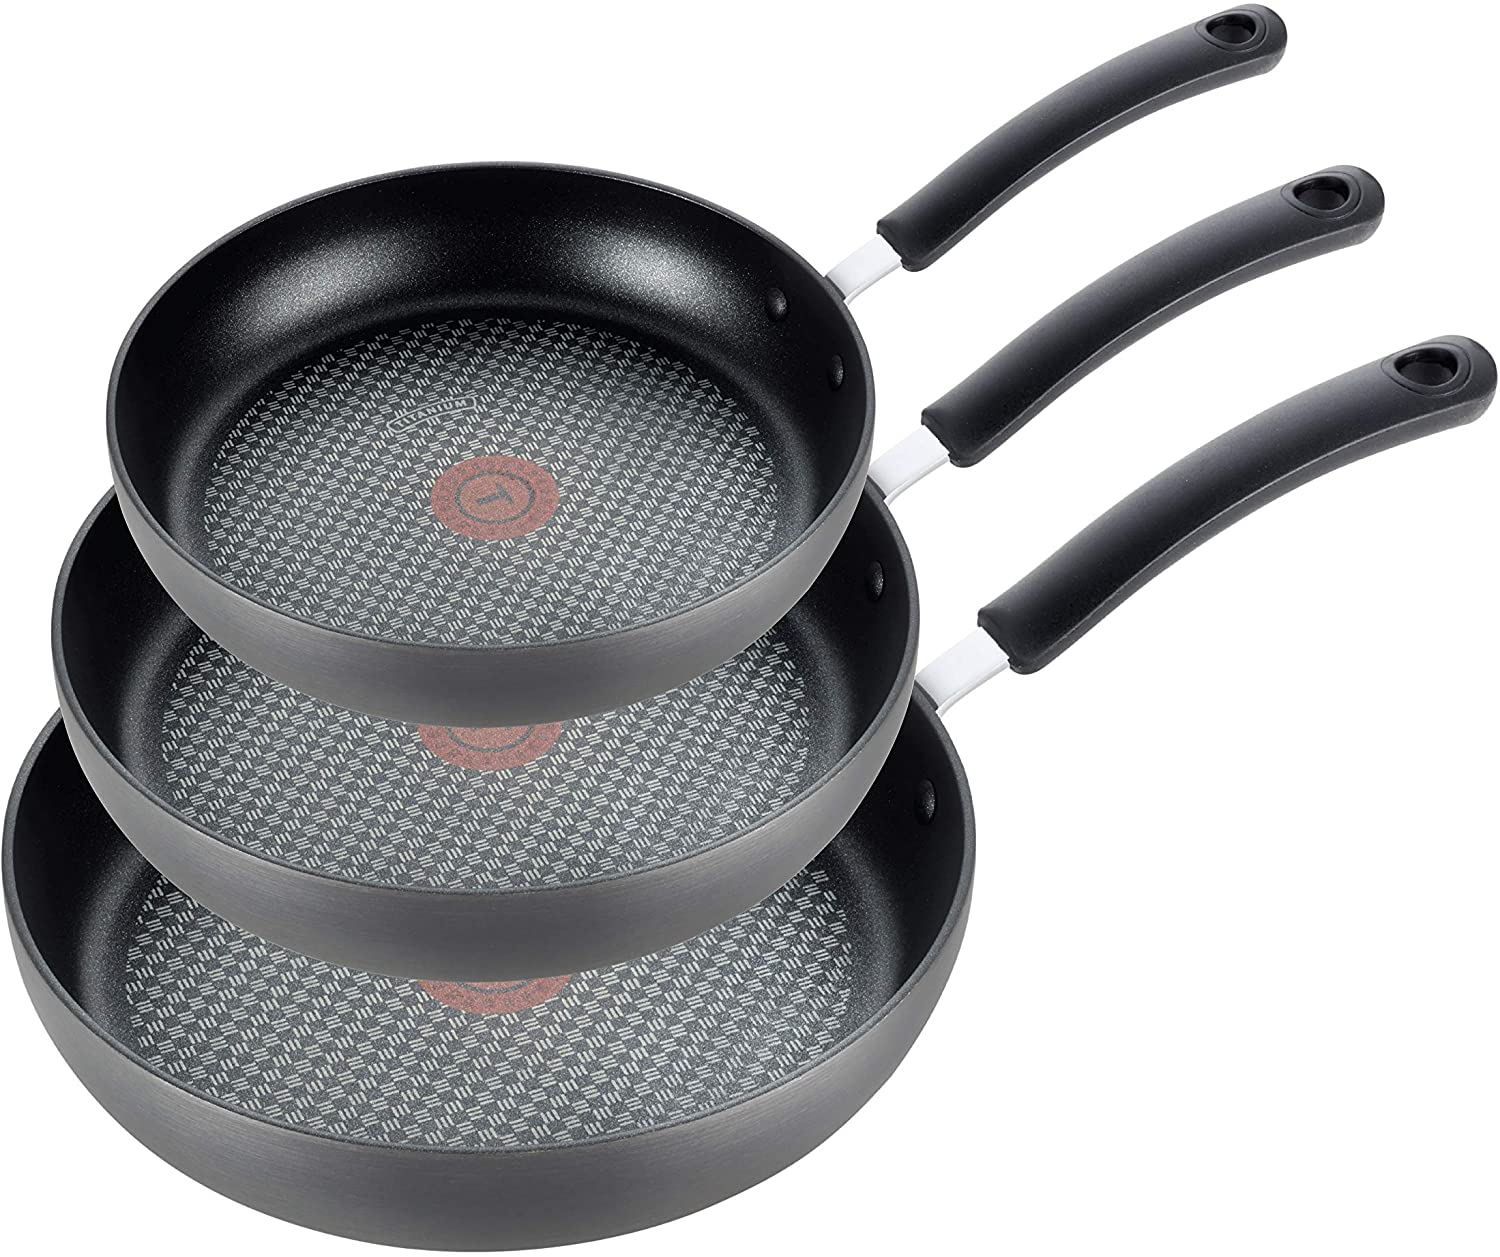 T-fal Ultimate Hard Anodized Nonstick Fry Pan Cookware Set